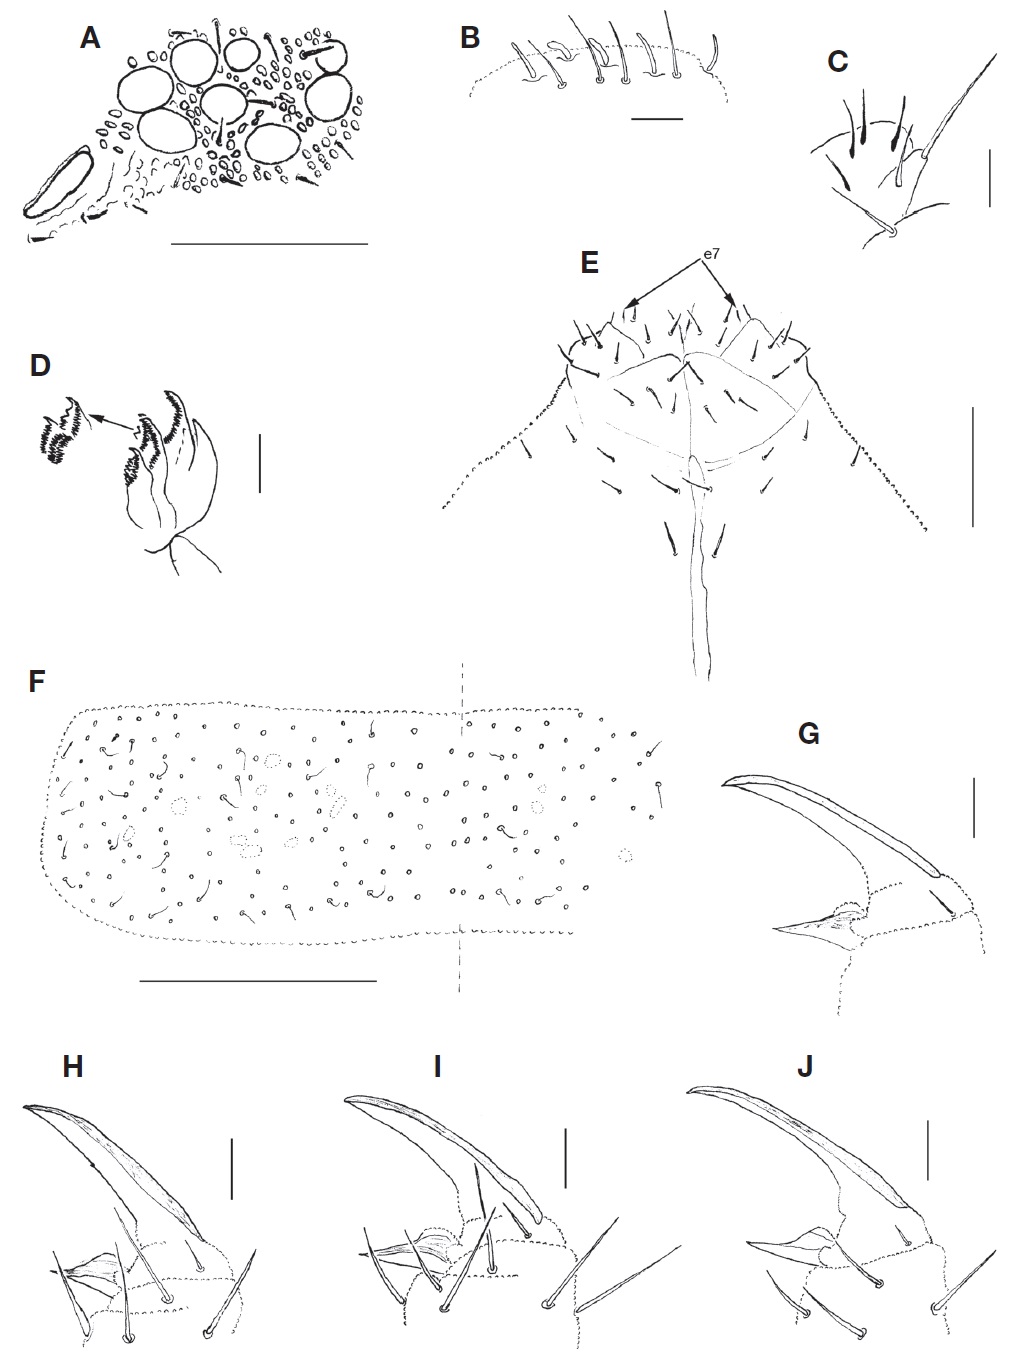 Pachyotoma takeshitai (Kinoshita, 1916). A, PAO and ocelli; B, Ant III organ; C, Maxillary outer lobe; D, Head of maxilla; E, Ventral chaetotaxy of head distal part; F, Dorsal chaetotaxy of Th II (chaetae only marked with circles); G, Claw and empodium of leg I; H, Claw and empodium of leg II; I, Claw and empodium of leg III; J, Claw and empodium of leg I in another specimen. Scale bars: A, E=0.05 mm, B-D, G-J=0.01 mm, F=0.1 mm.